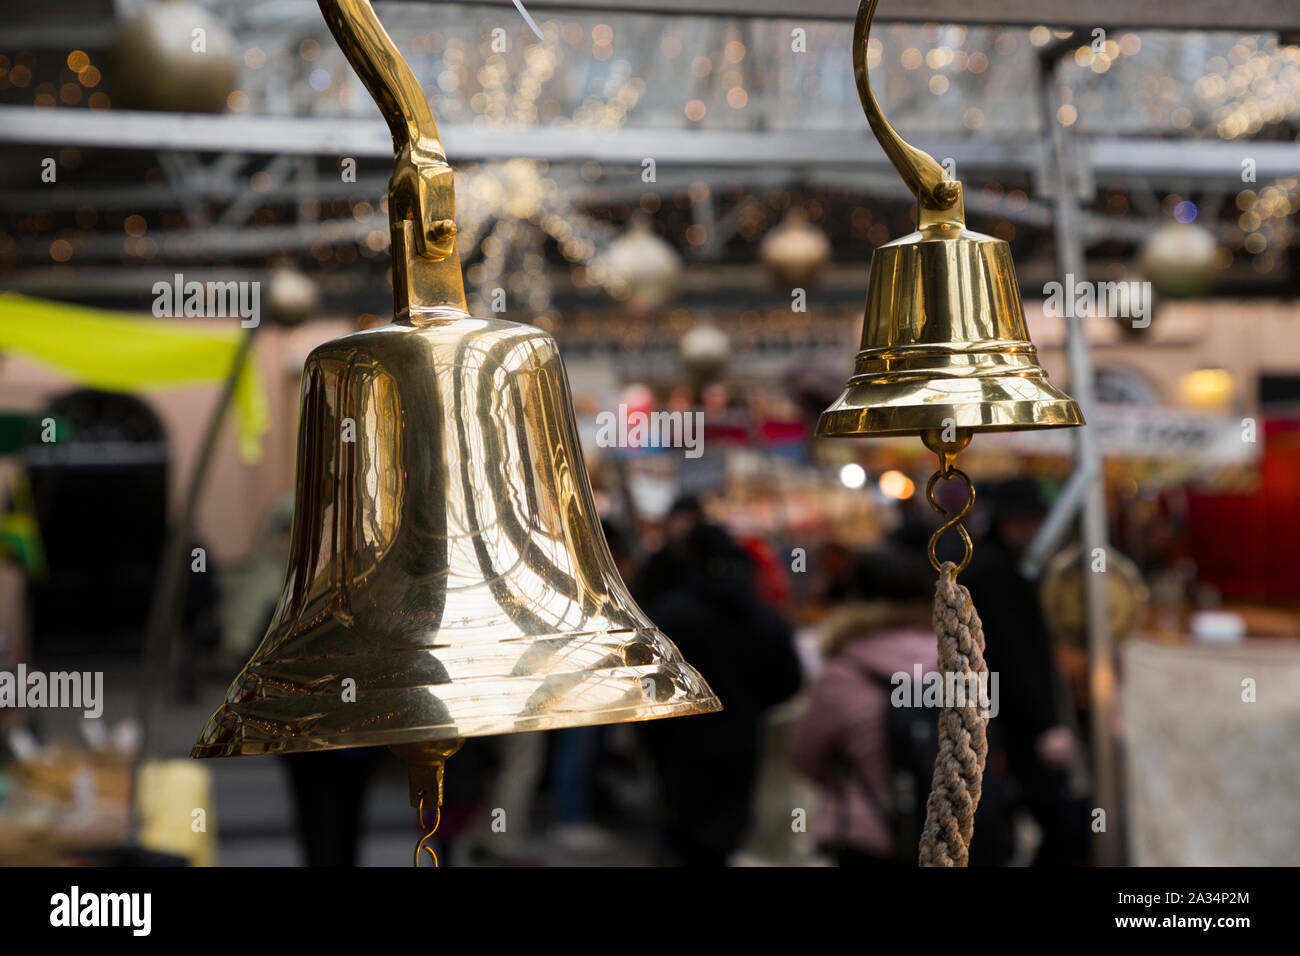 Brass bell, similar to a ships nautical bell, hanging for sale at Greenwich Market, at Christmas. Greenwich, London. UK (105) Stock Photo